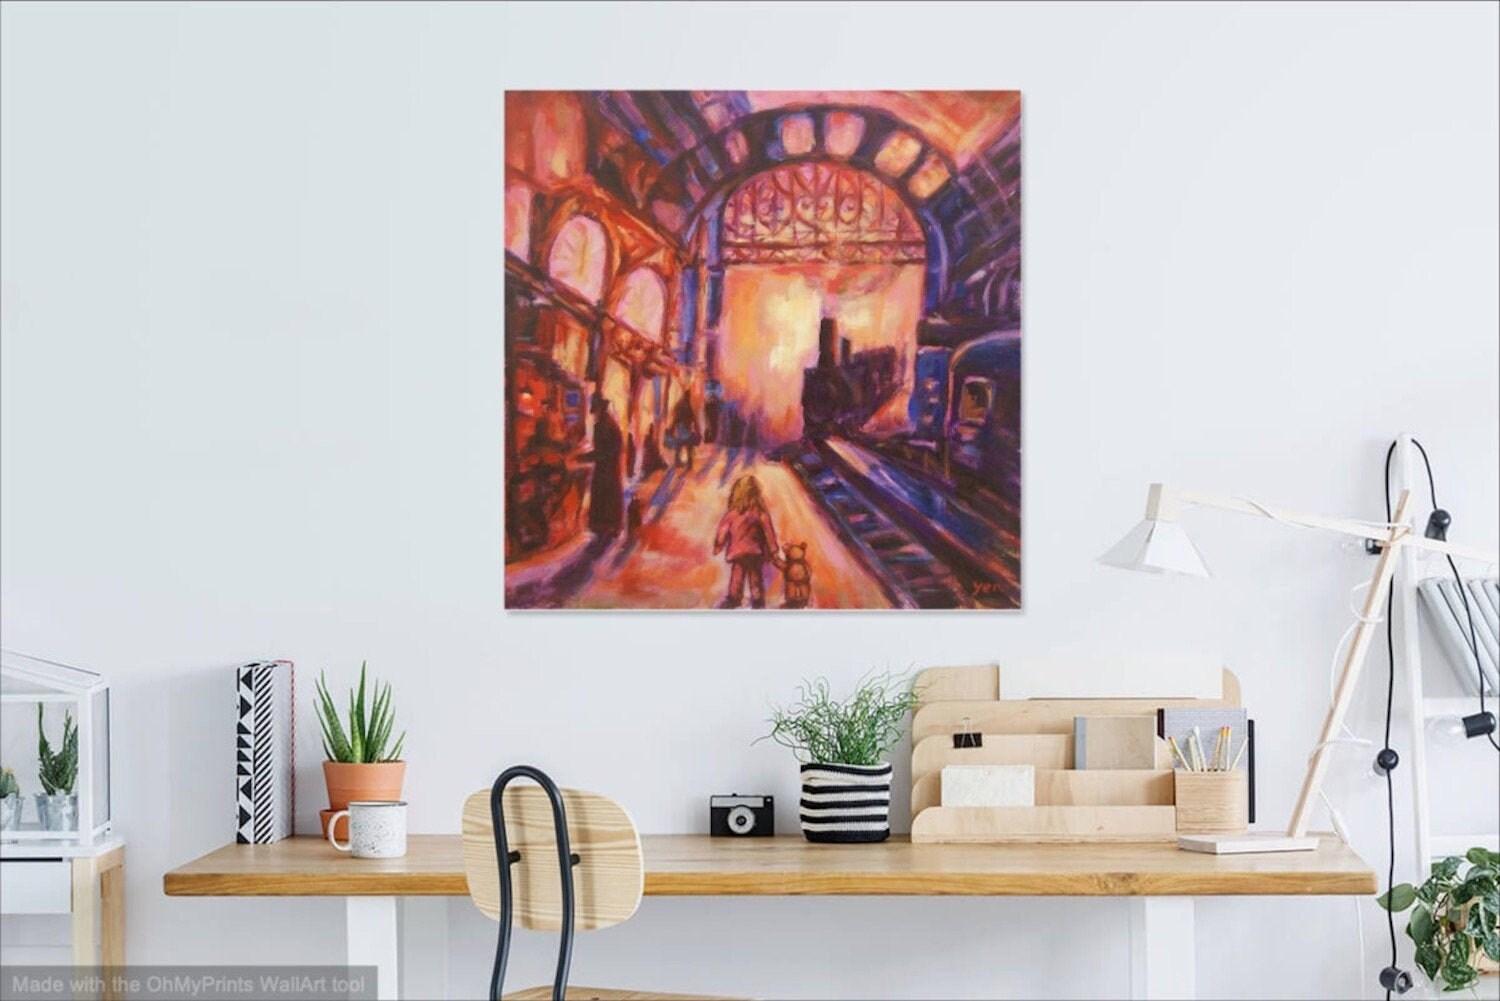 Train Station Impressionist Painting Canvas Art with little Girl and Teddy Bear in Monet style bright orange, original whimsical acrylic art